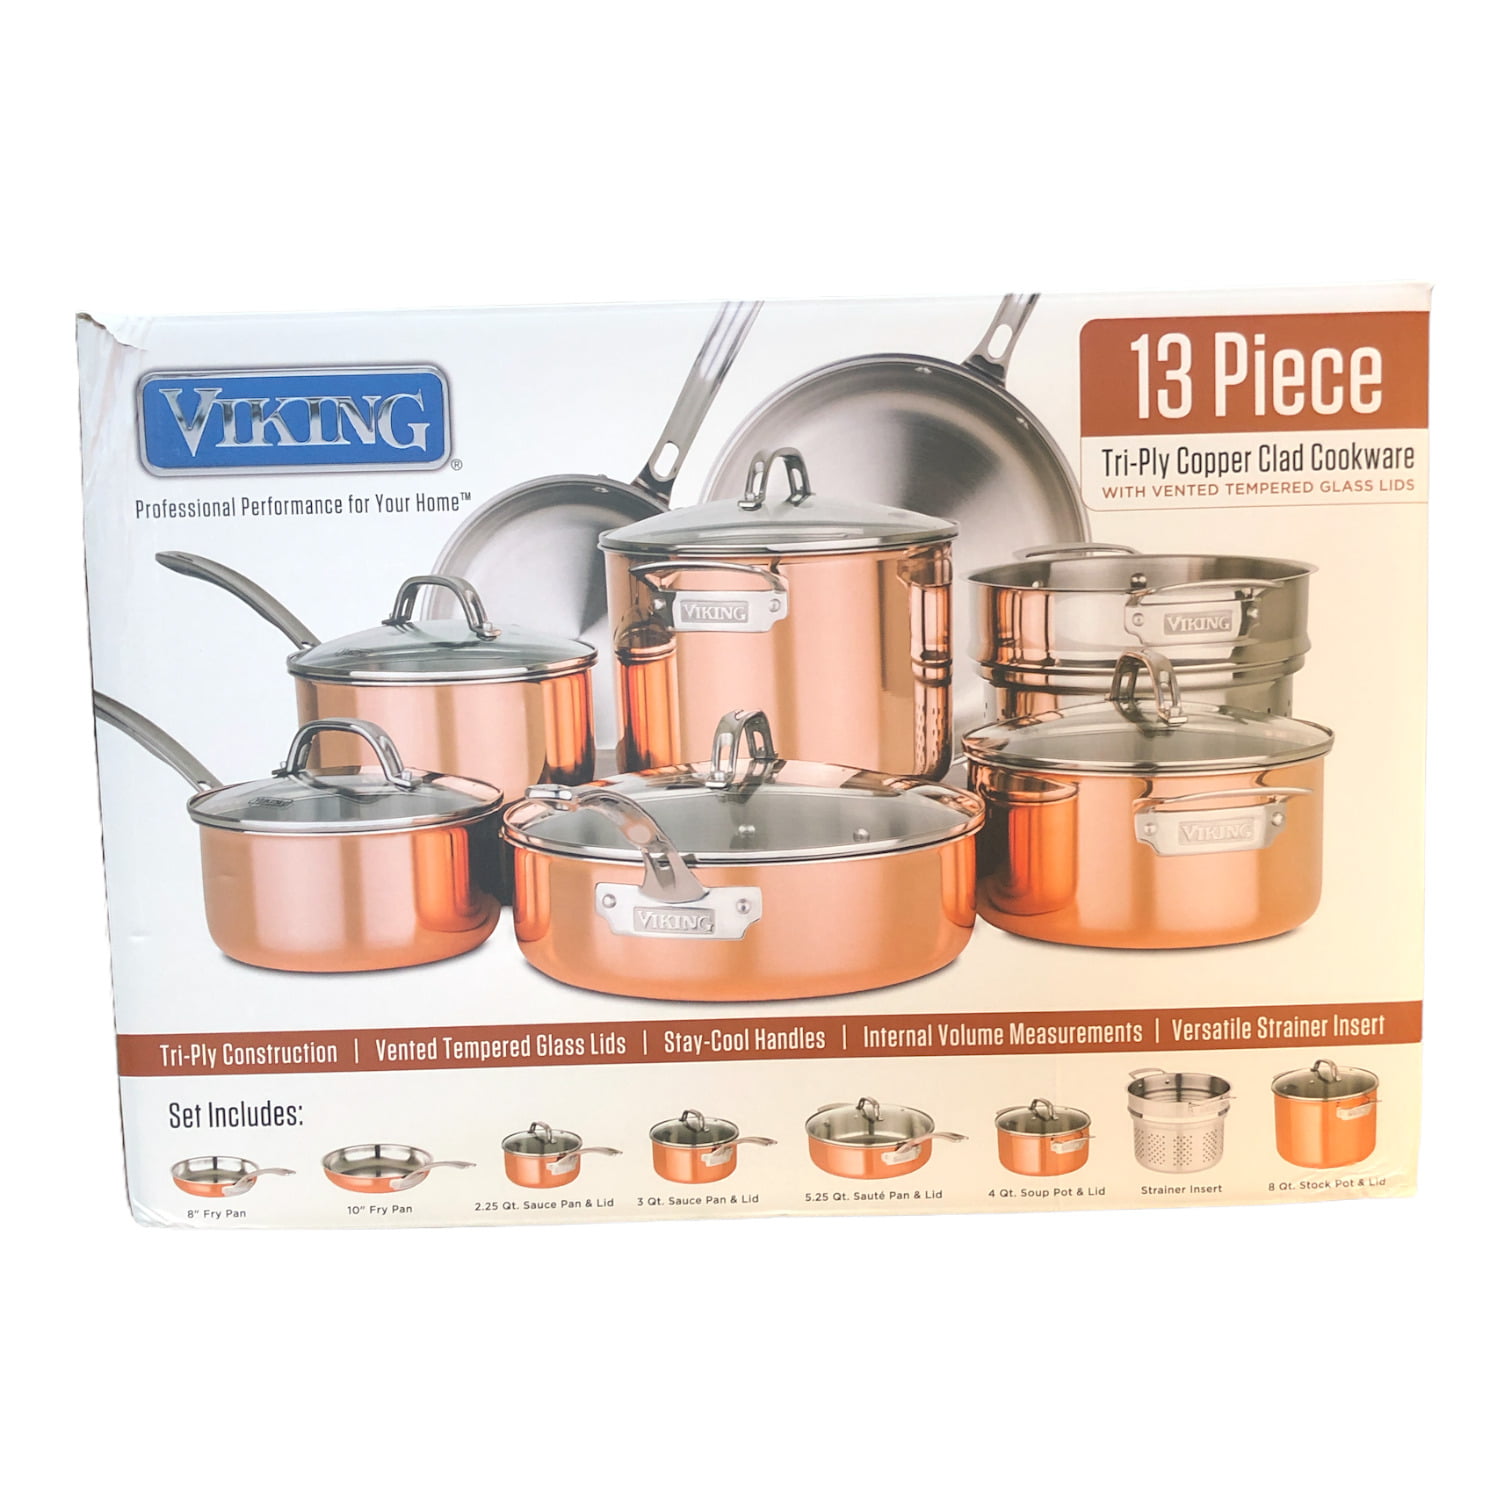 Viking Cookware Set - 13 Piece - Professional 5-ply Stainless Steel –  Cutlery and More